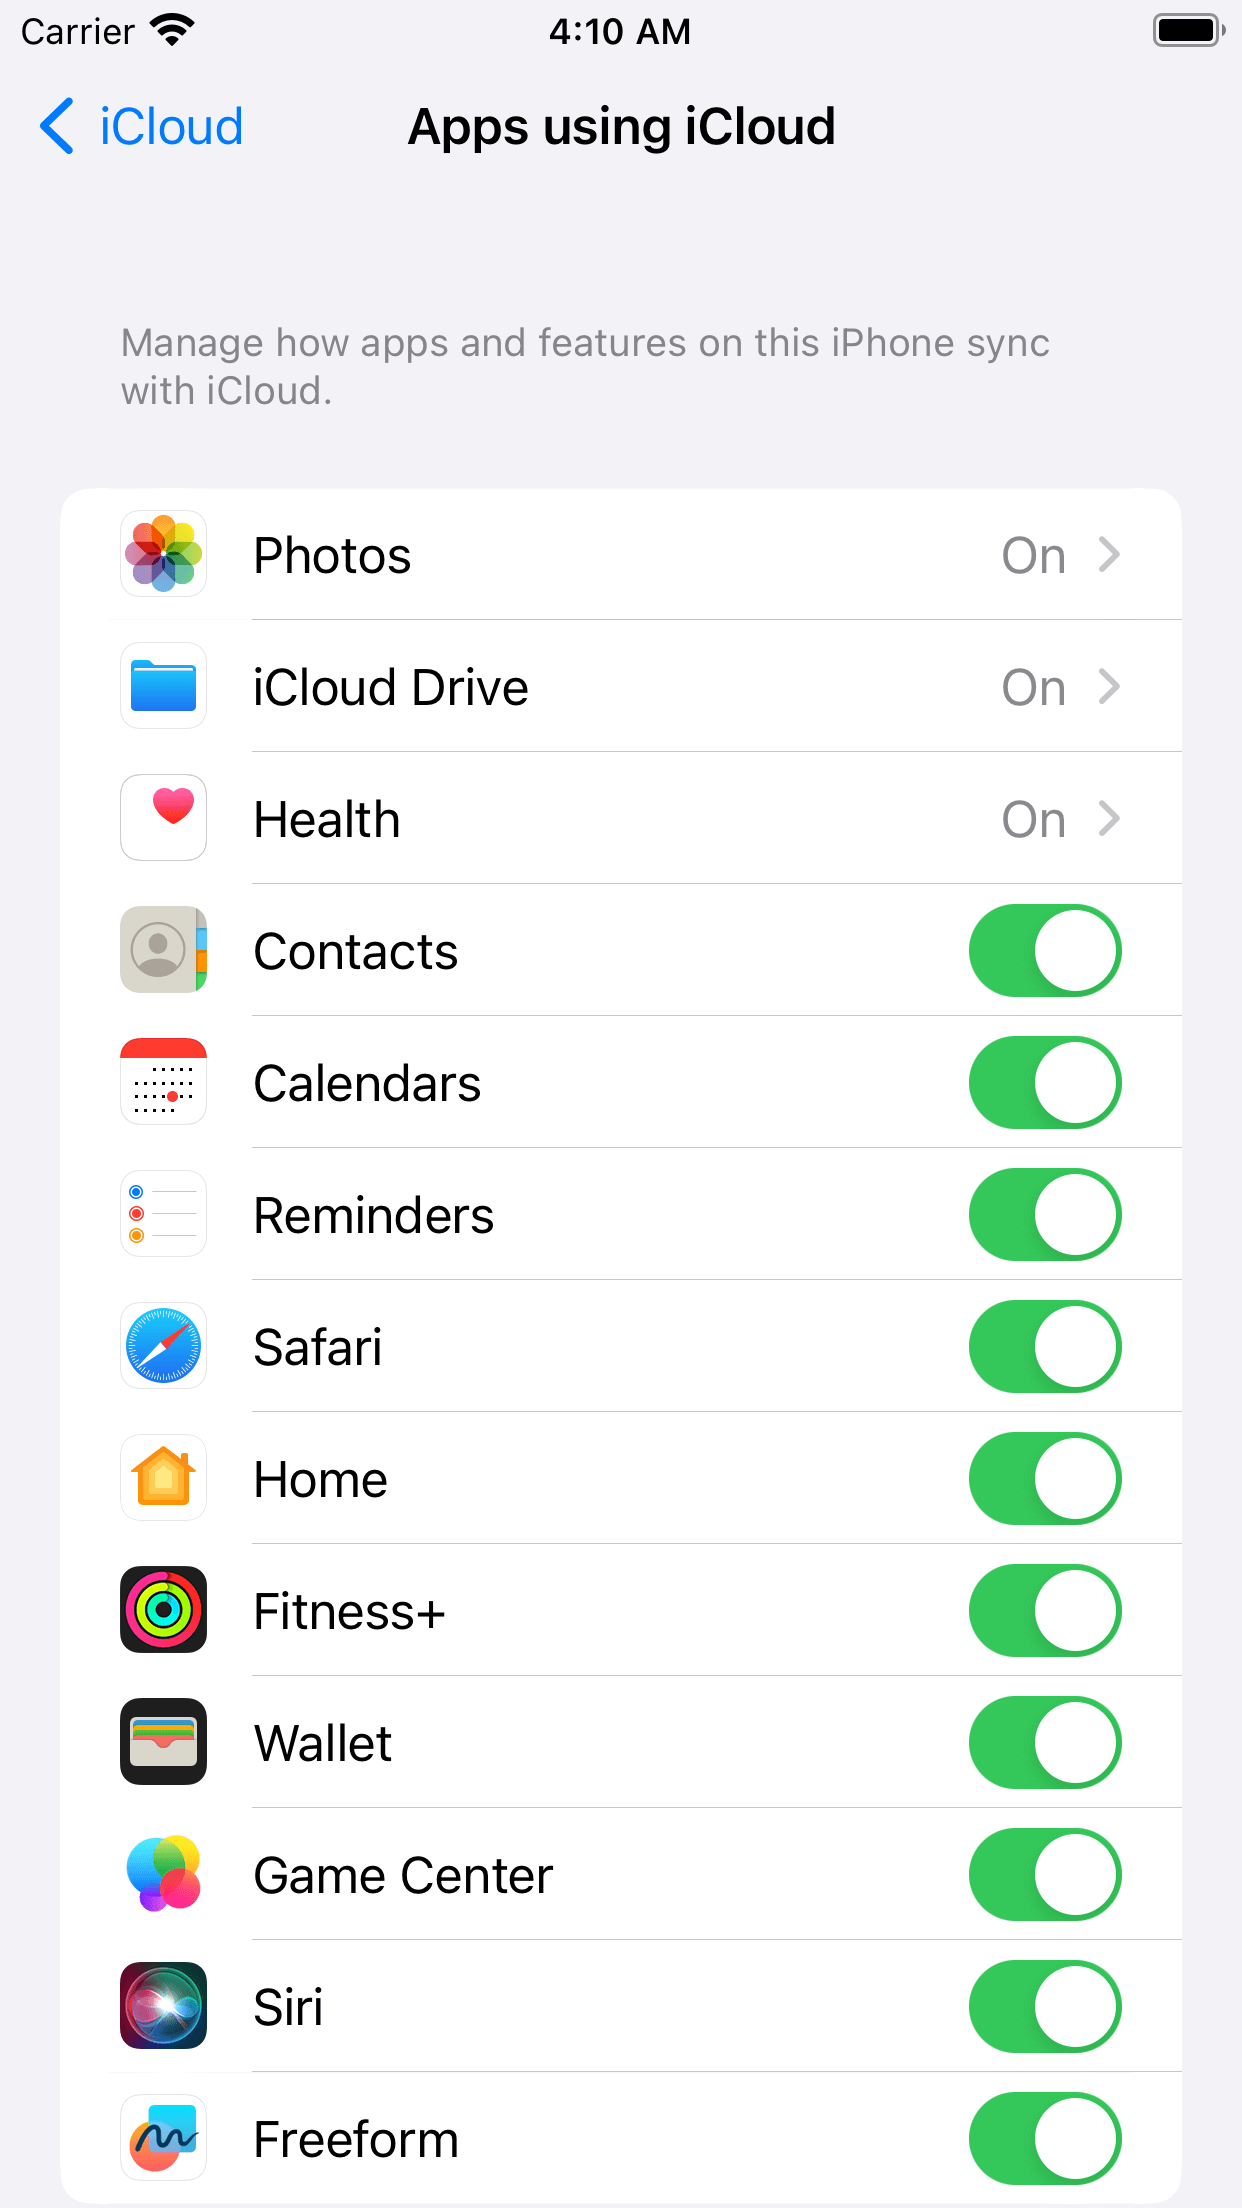 Contacts is turned on